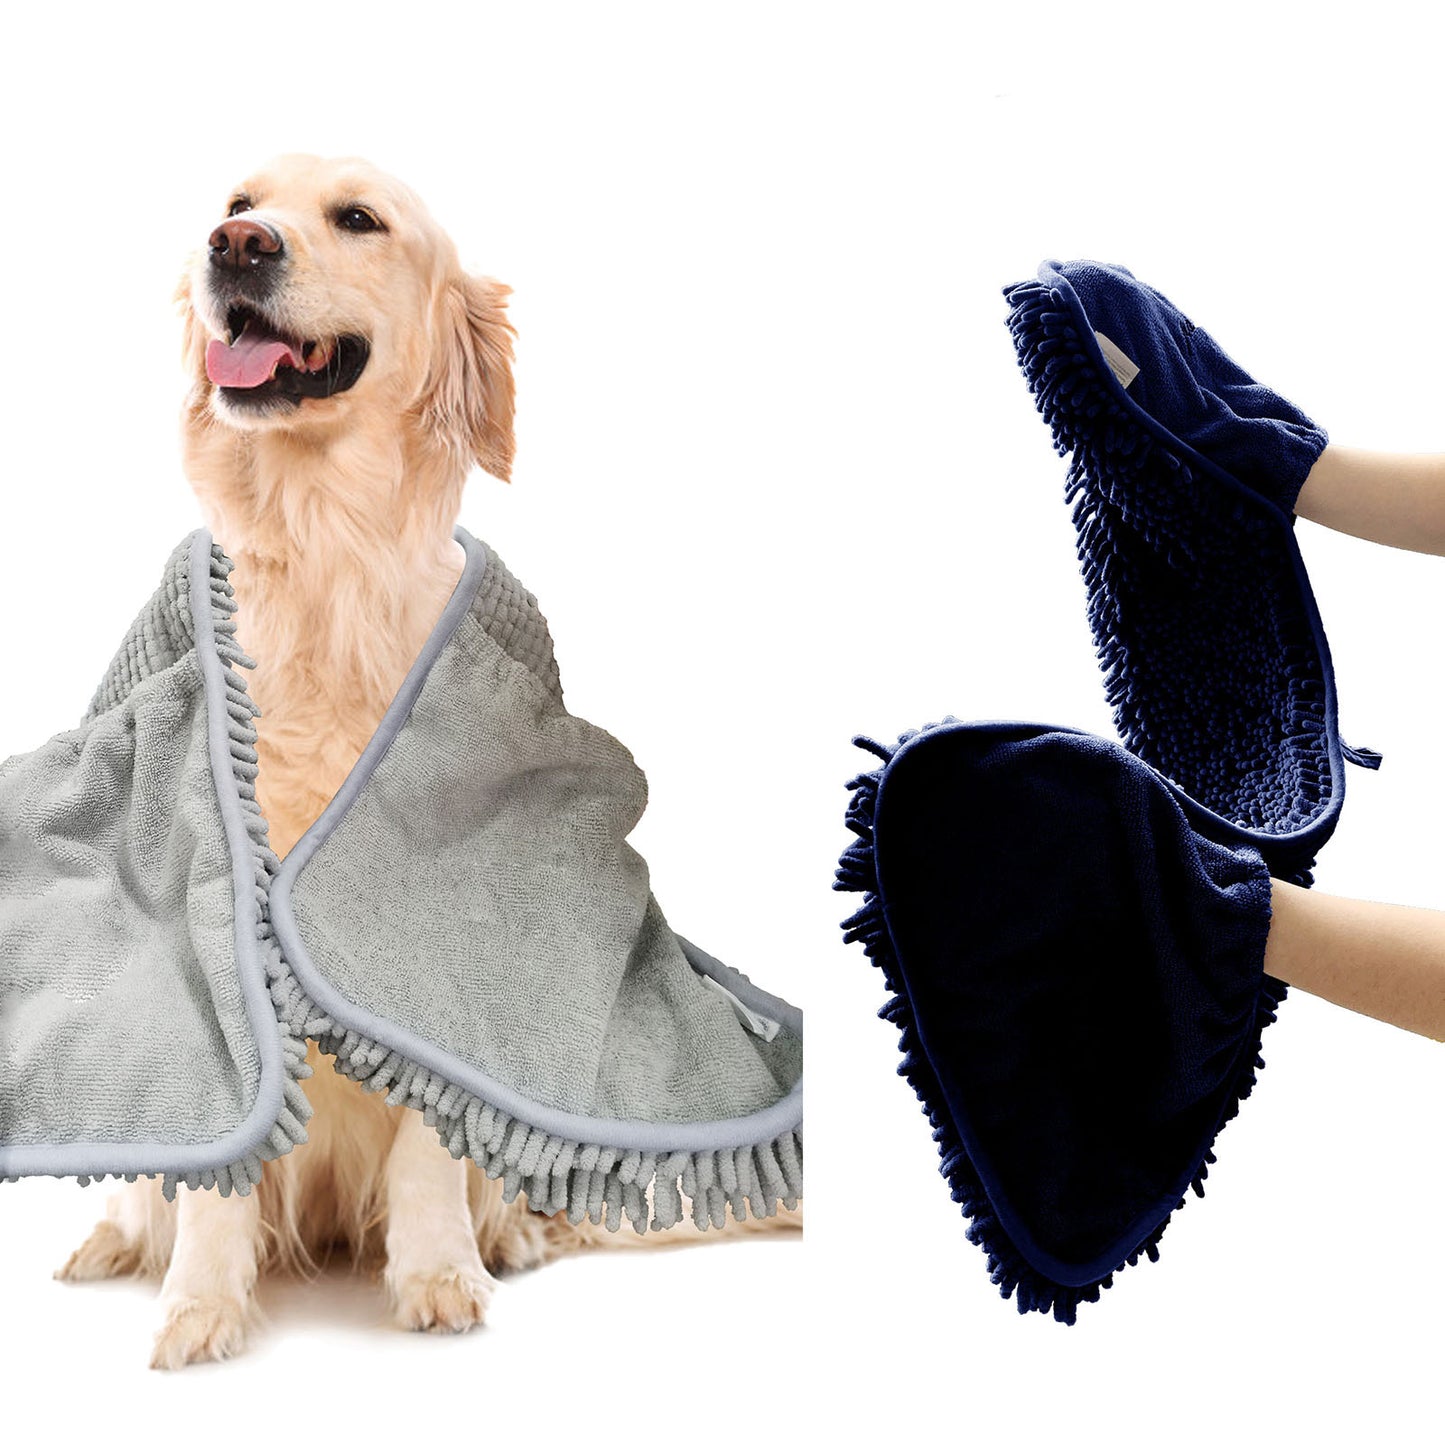 Exclusivo Mezcla-Microfiber Dog Towel for Drying Dogs 35'' x 15'' Extra Large, Absorbent Quick Drying Dog Shammy Chenille Dog Bath Dog Drying Towel with Hand Pockets, Machine Washable Pet Towel(Grey)